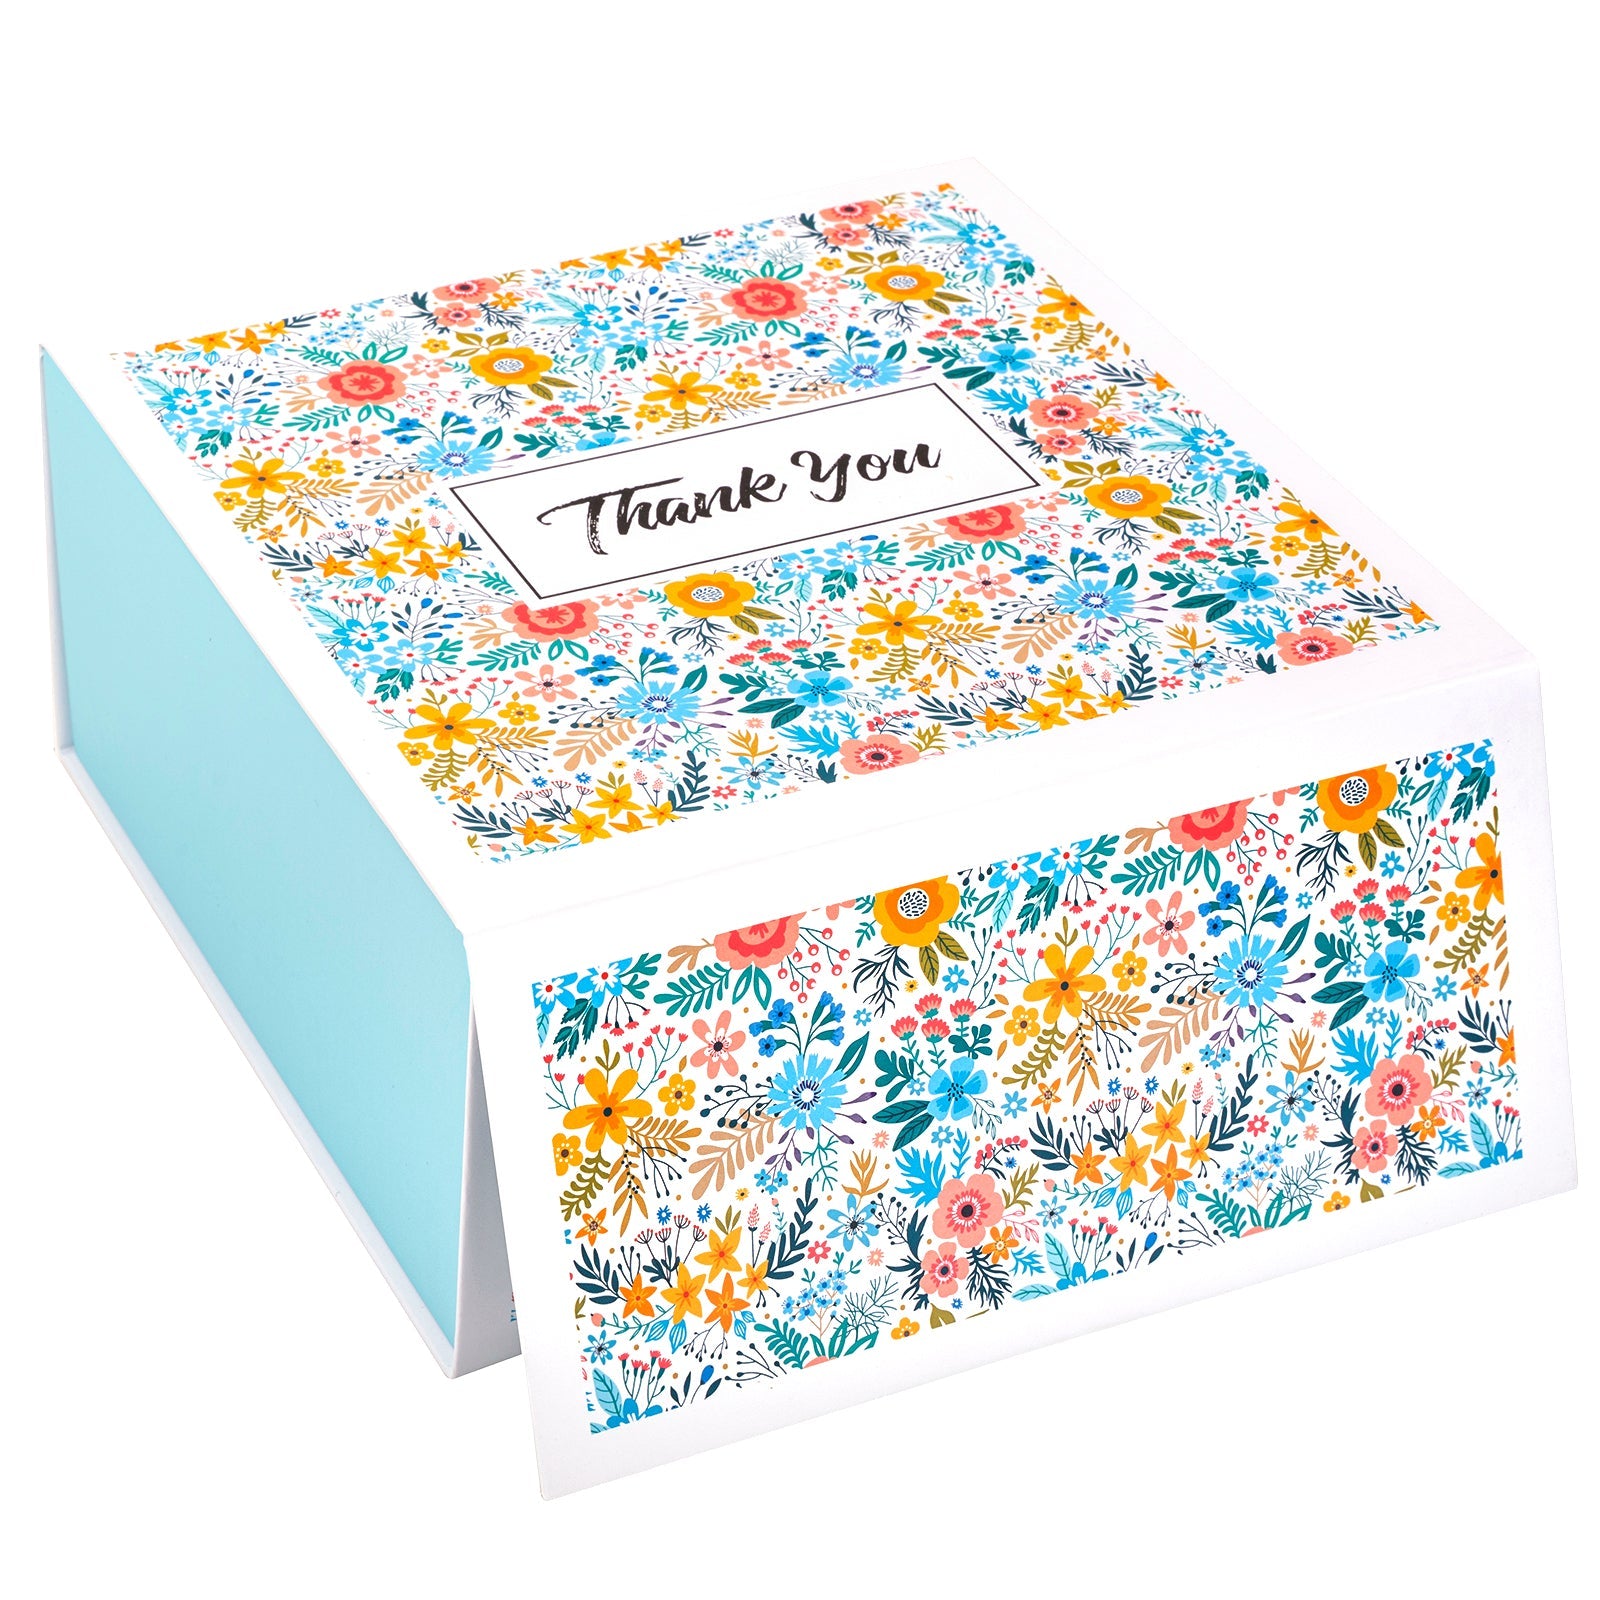 8x8x4 inch Magnetic Closure Box Blooms Thank You